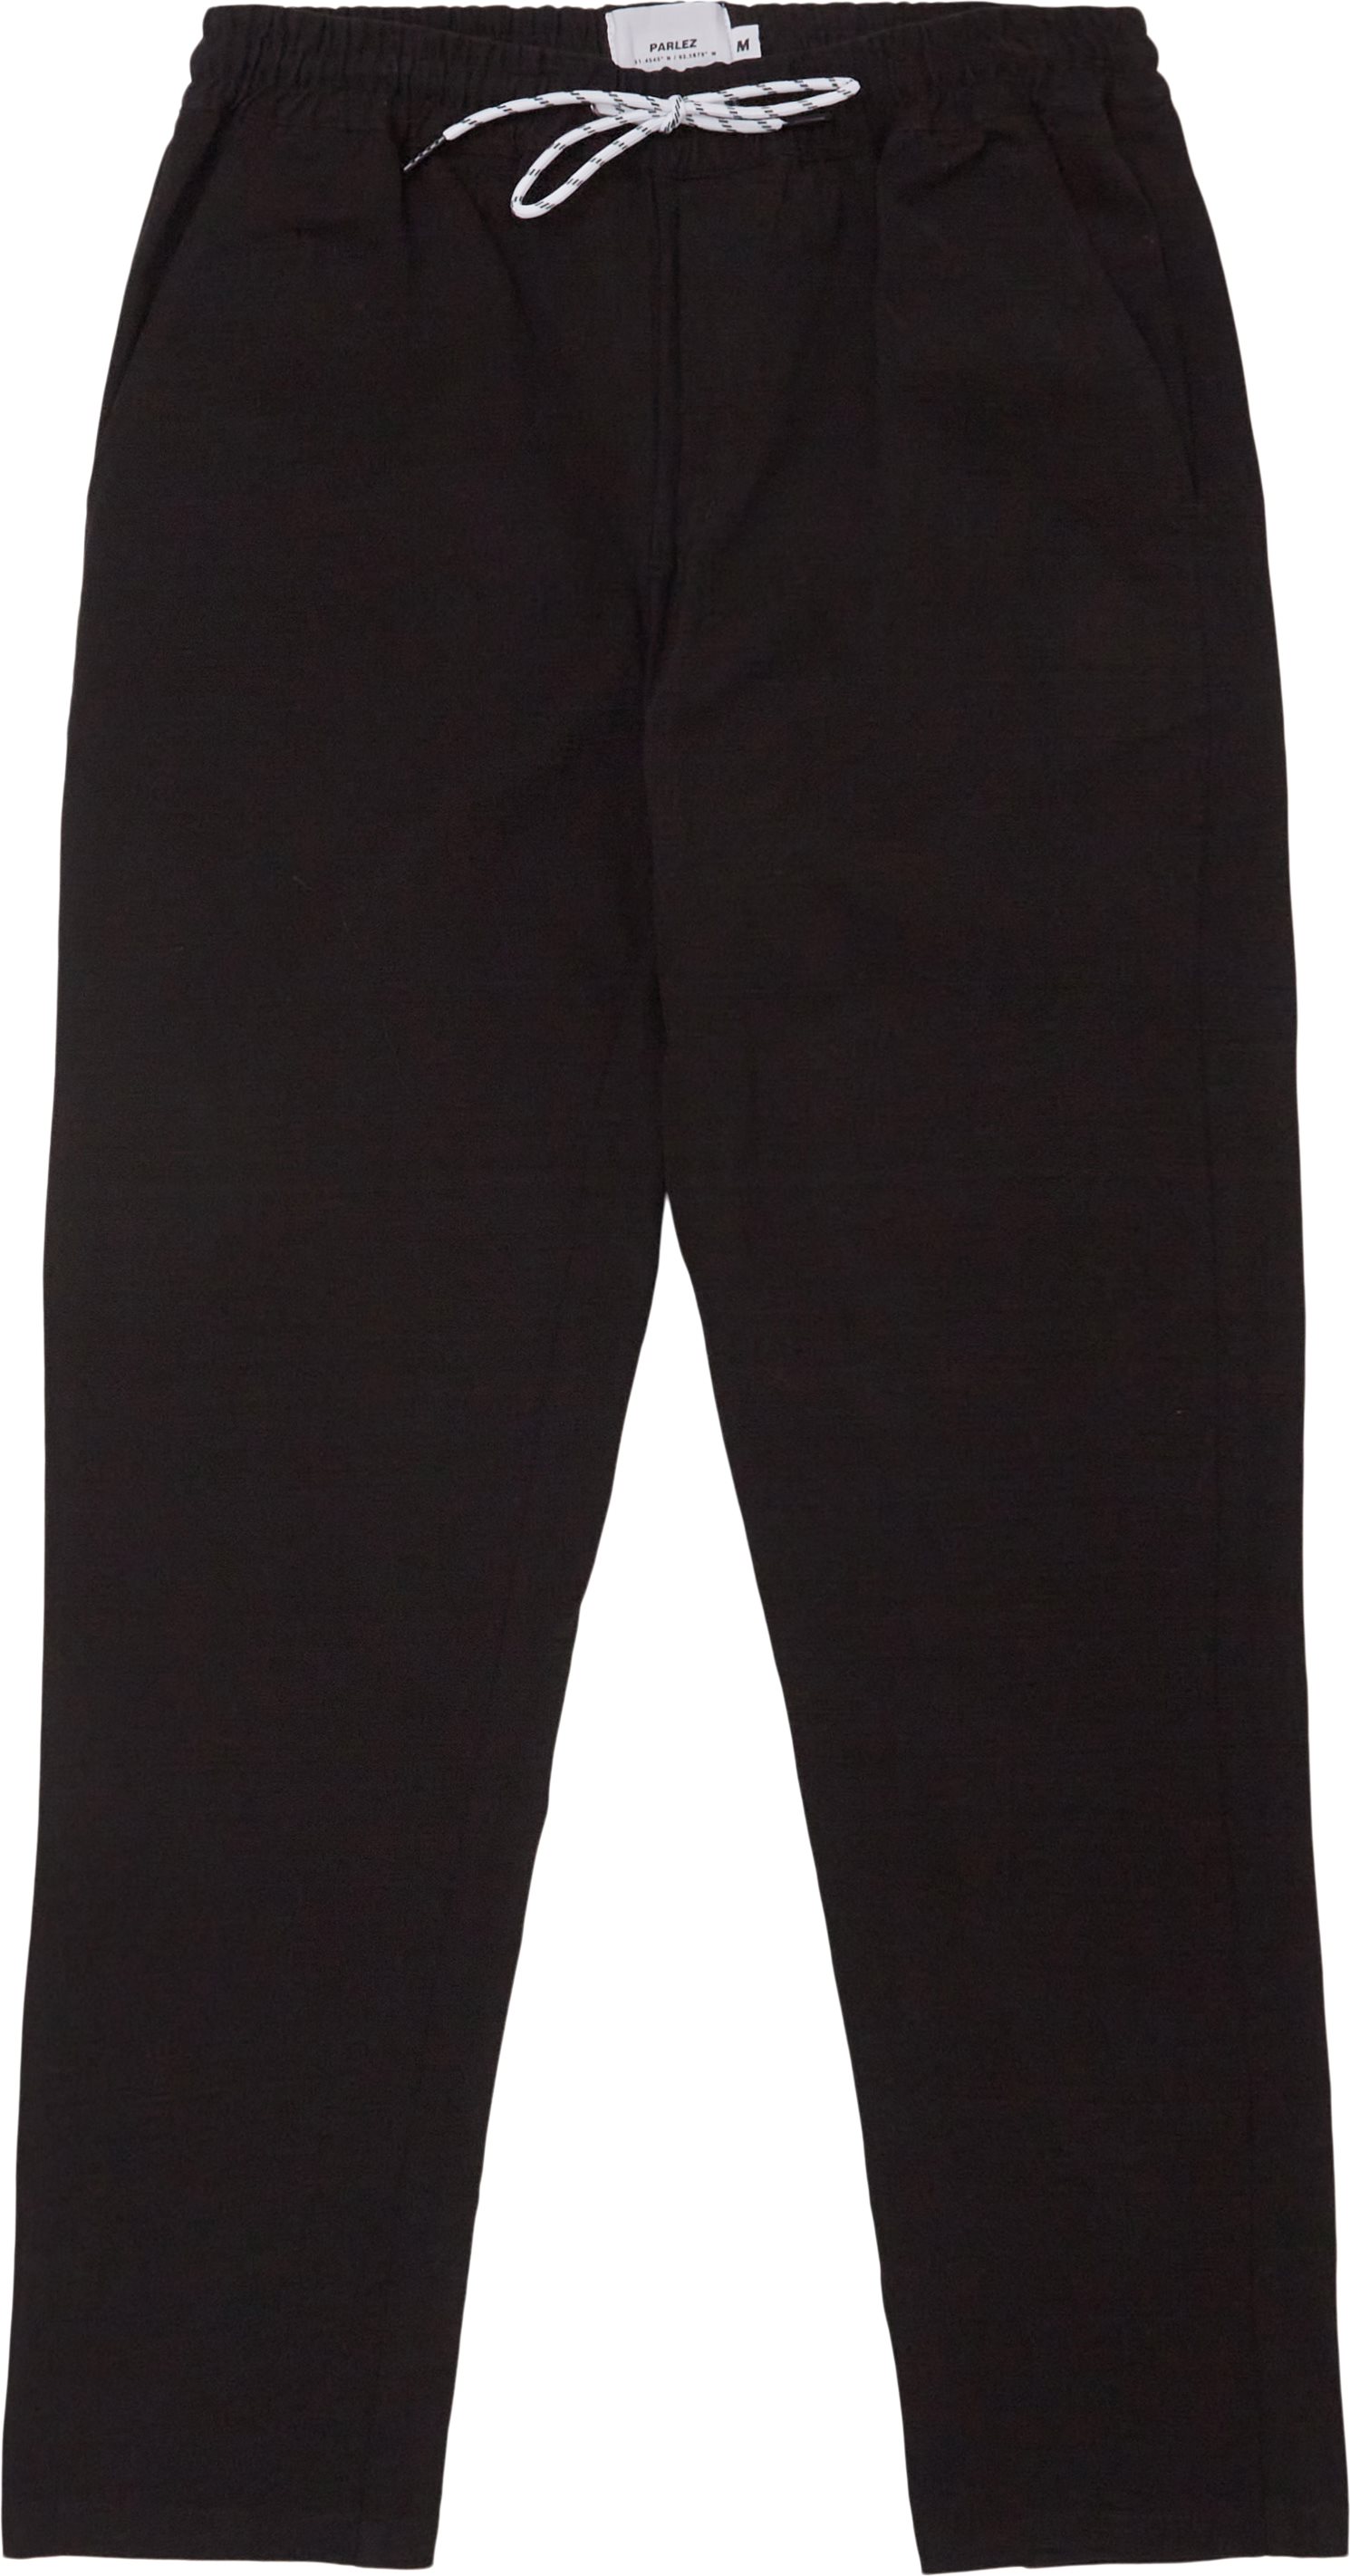 Spring Trousers  - Trousers - Regular fit - Black